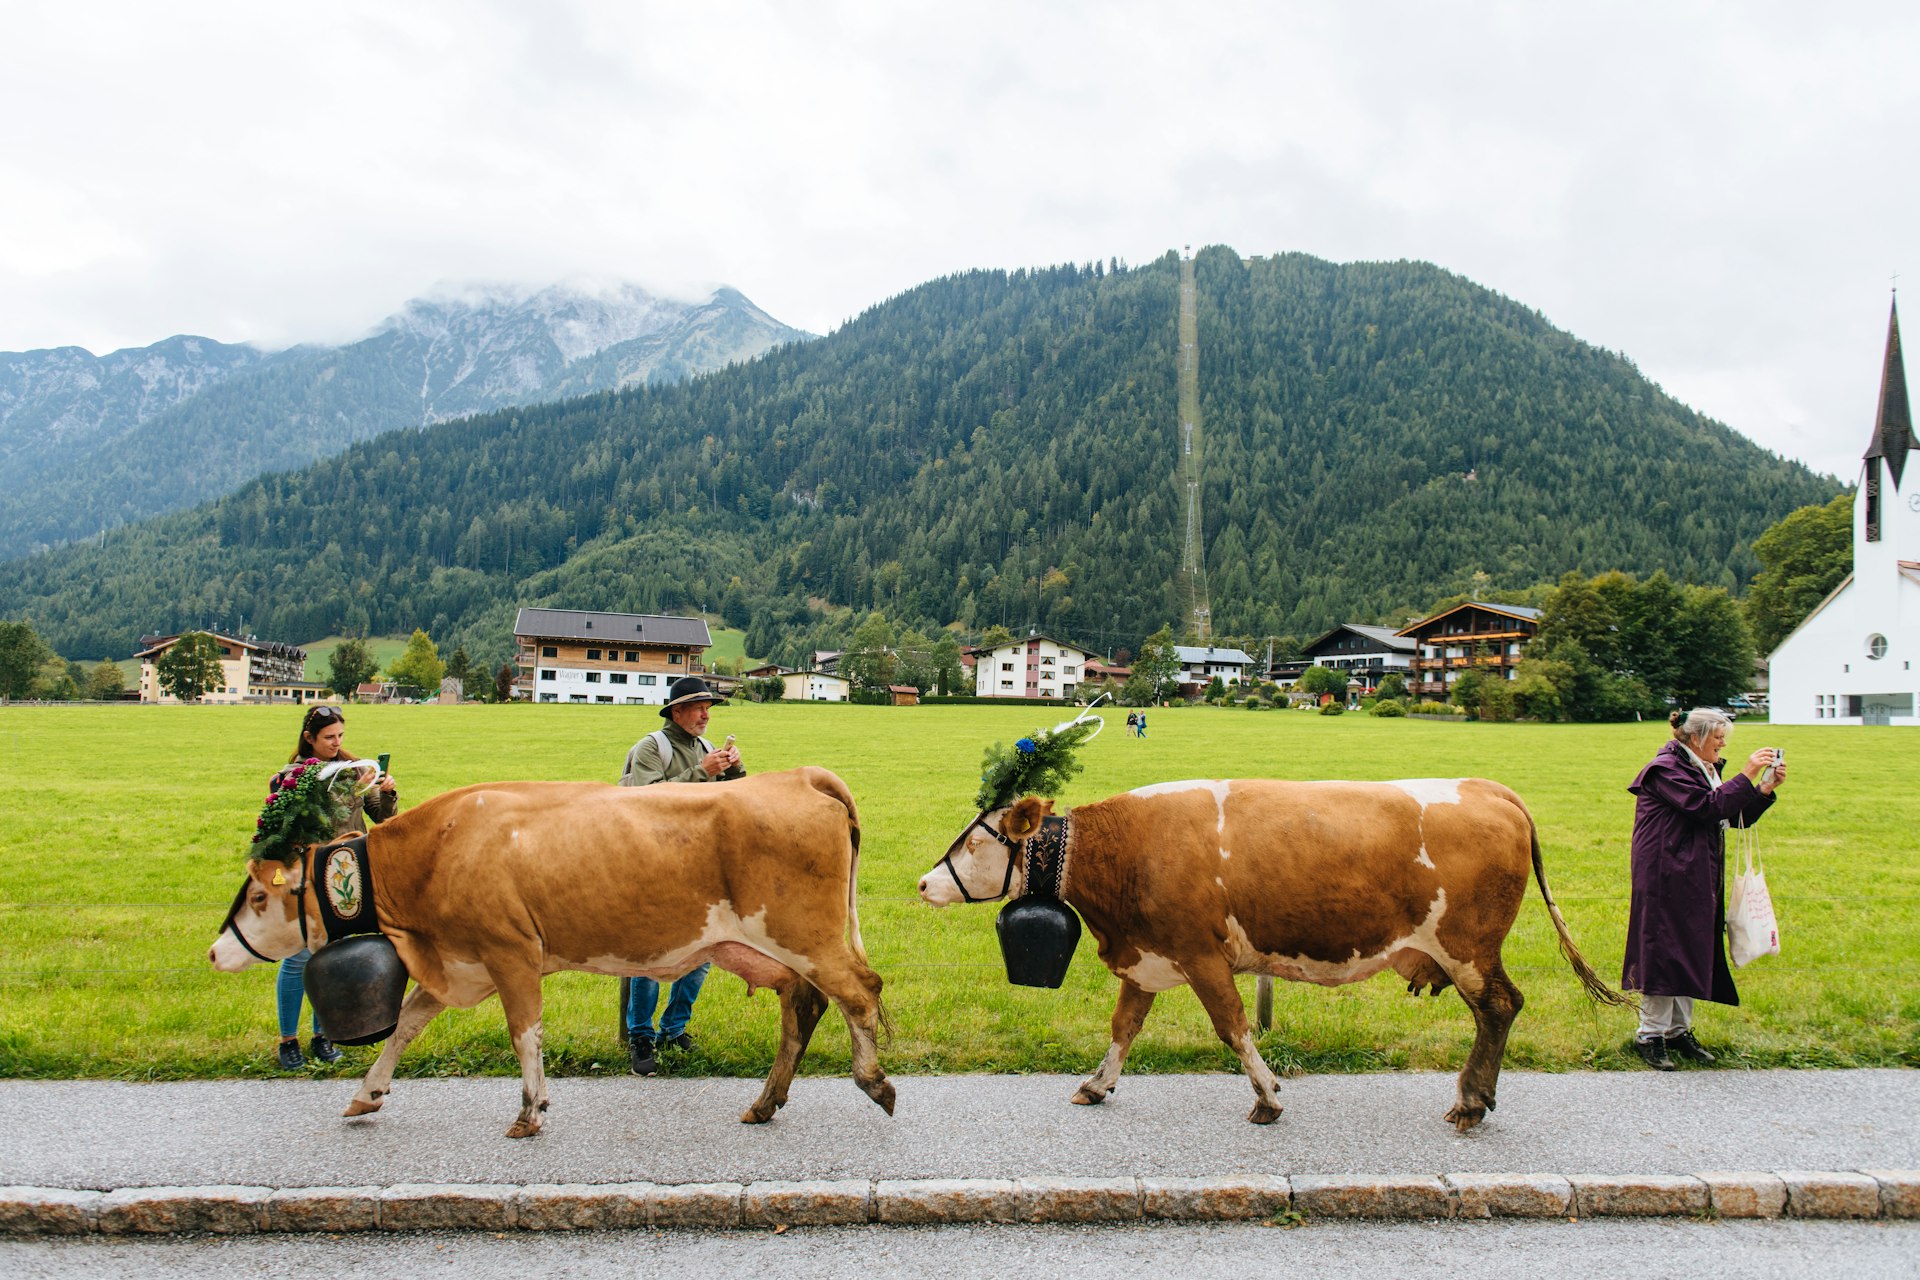 Two cows dressed in costume walk by onlooking spectators in the Austrian Alps